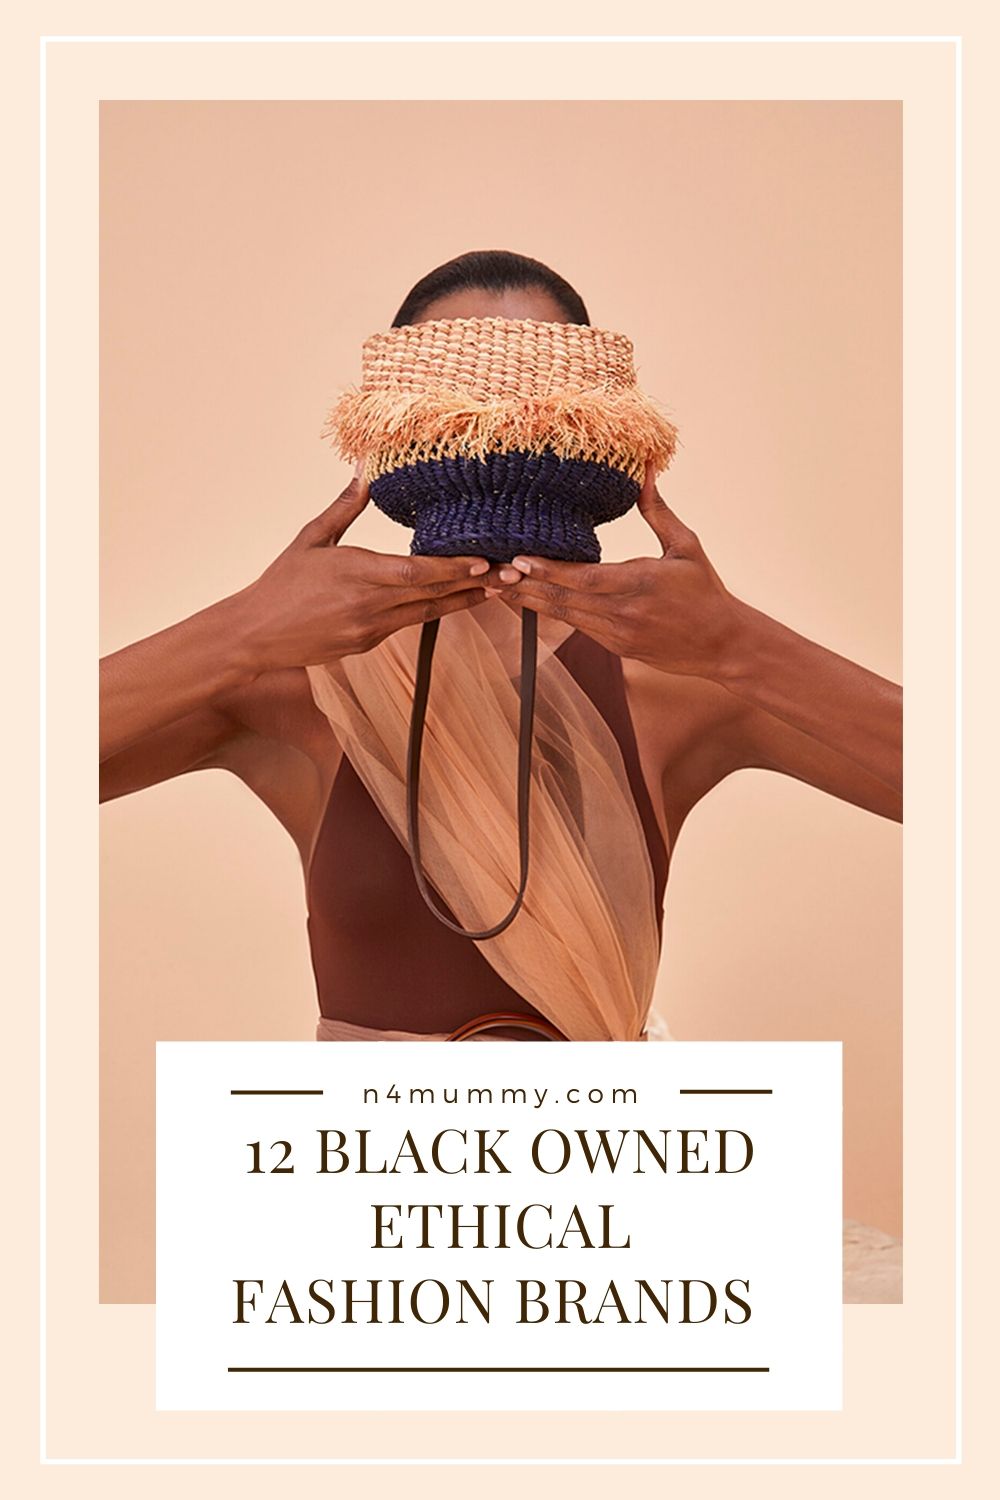 11 Black owned fashion brands that source ethically